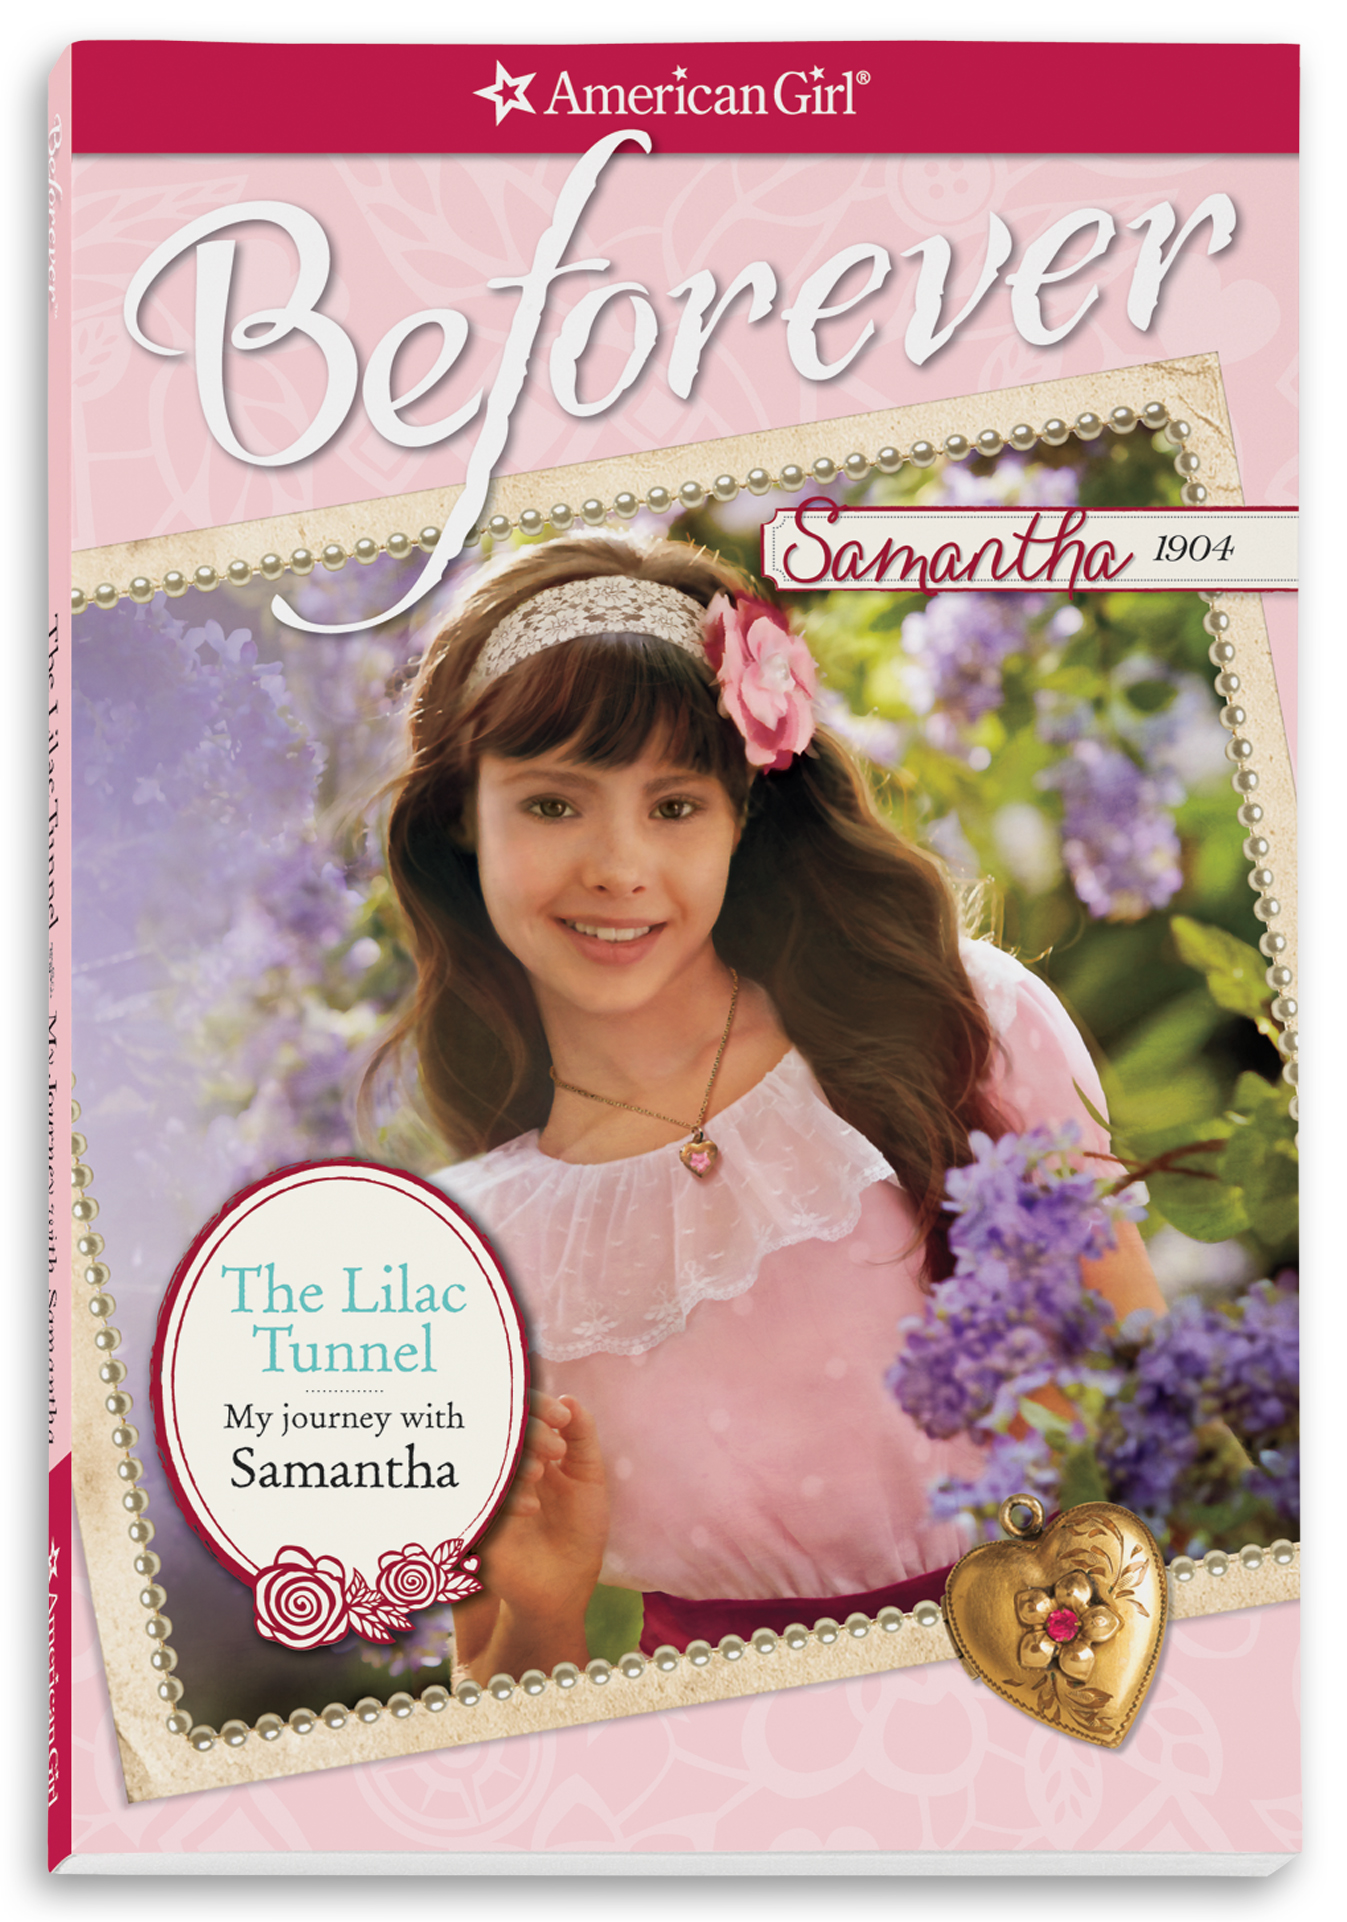 the-lilac-tunnel-my-journey-with-samantha-american-girl-wiki